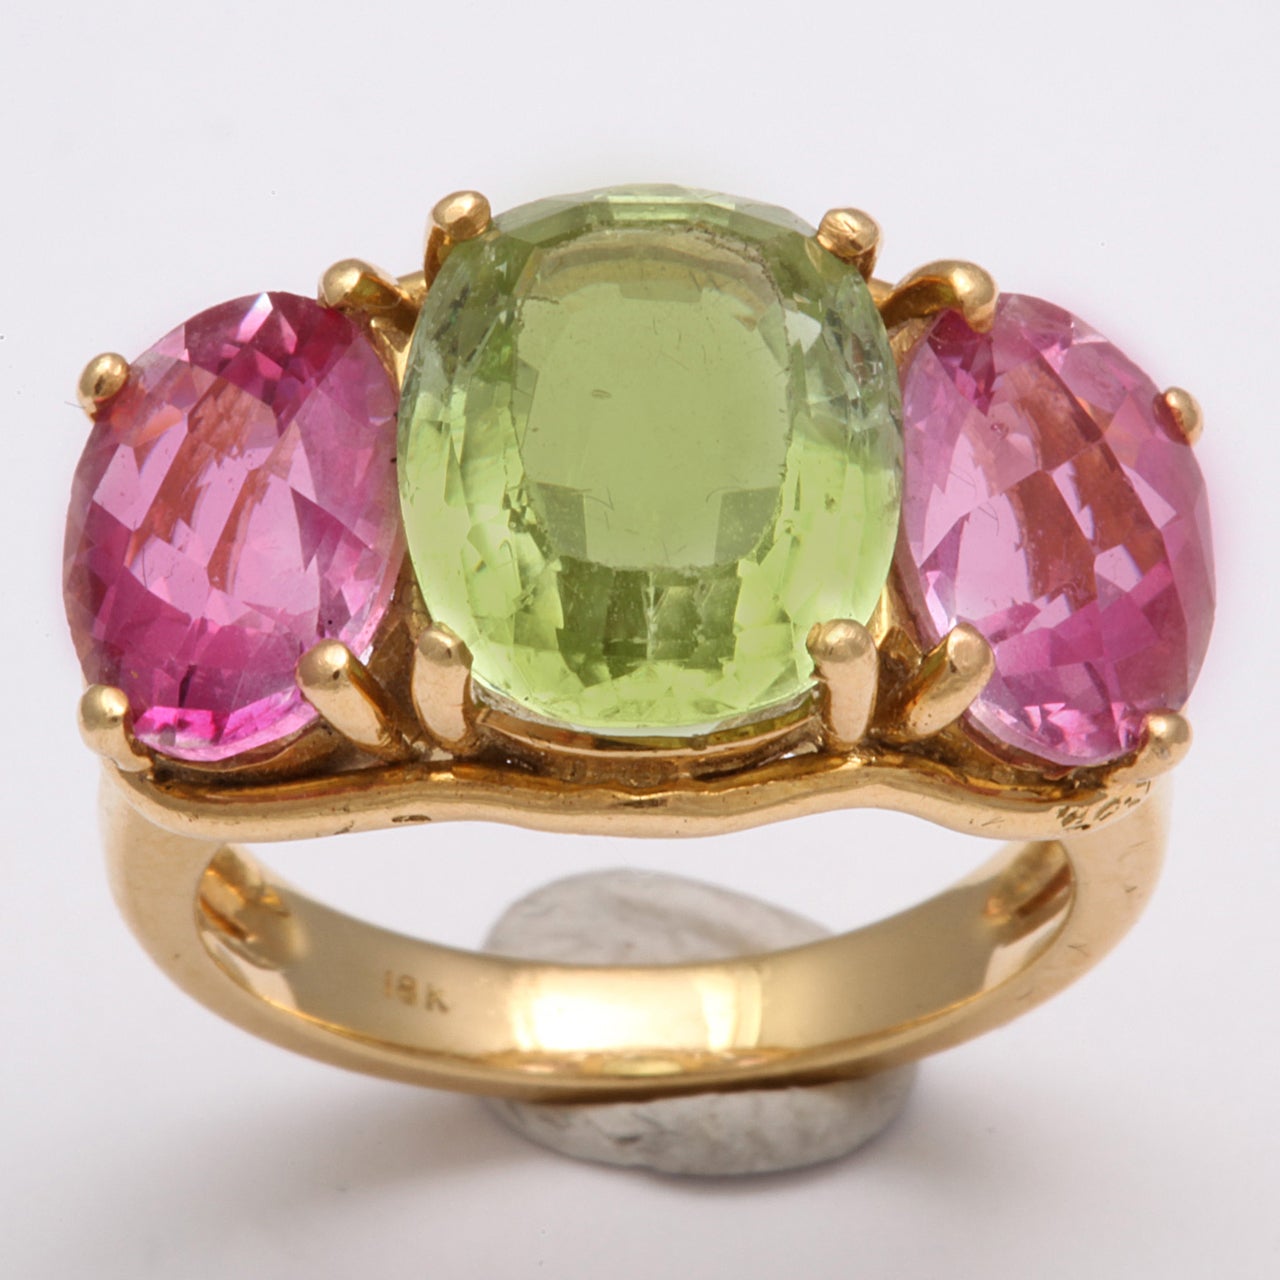 Prong set Pink Topaz &.rare Tourmaline three stone band set in 18kt Yellow Gold.
Verdura style.  Tourmaline center stone & the two side stones are faceted Pink Topaz. Frilly & feminine. Ca 1980.